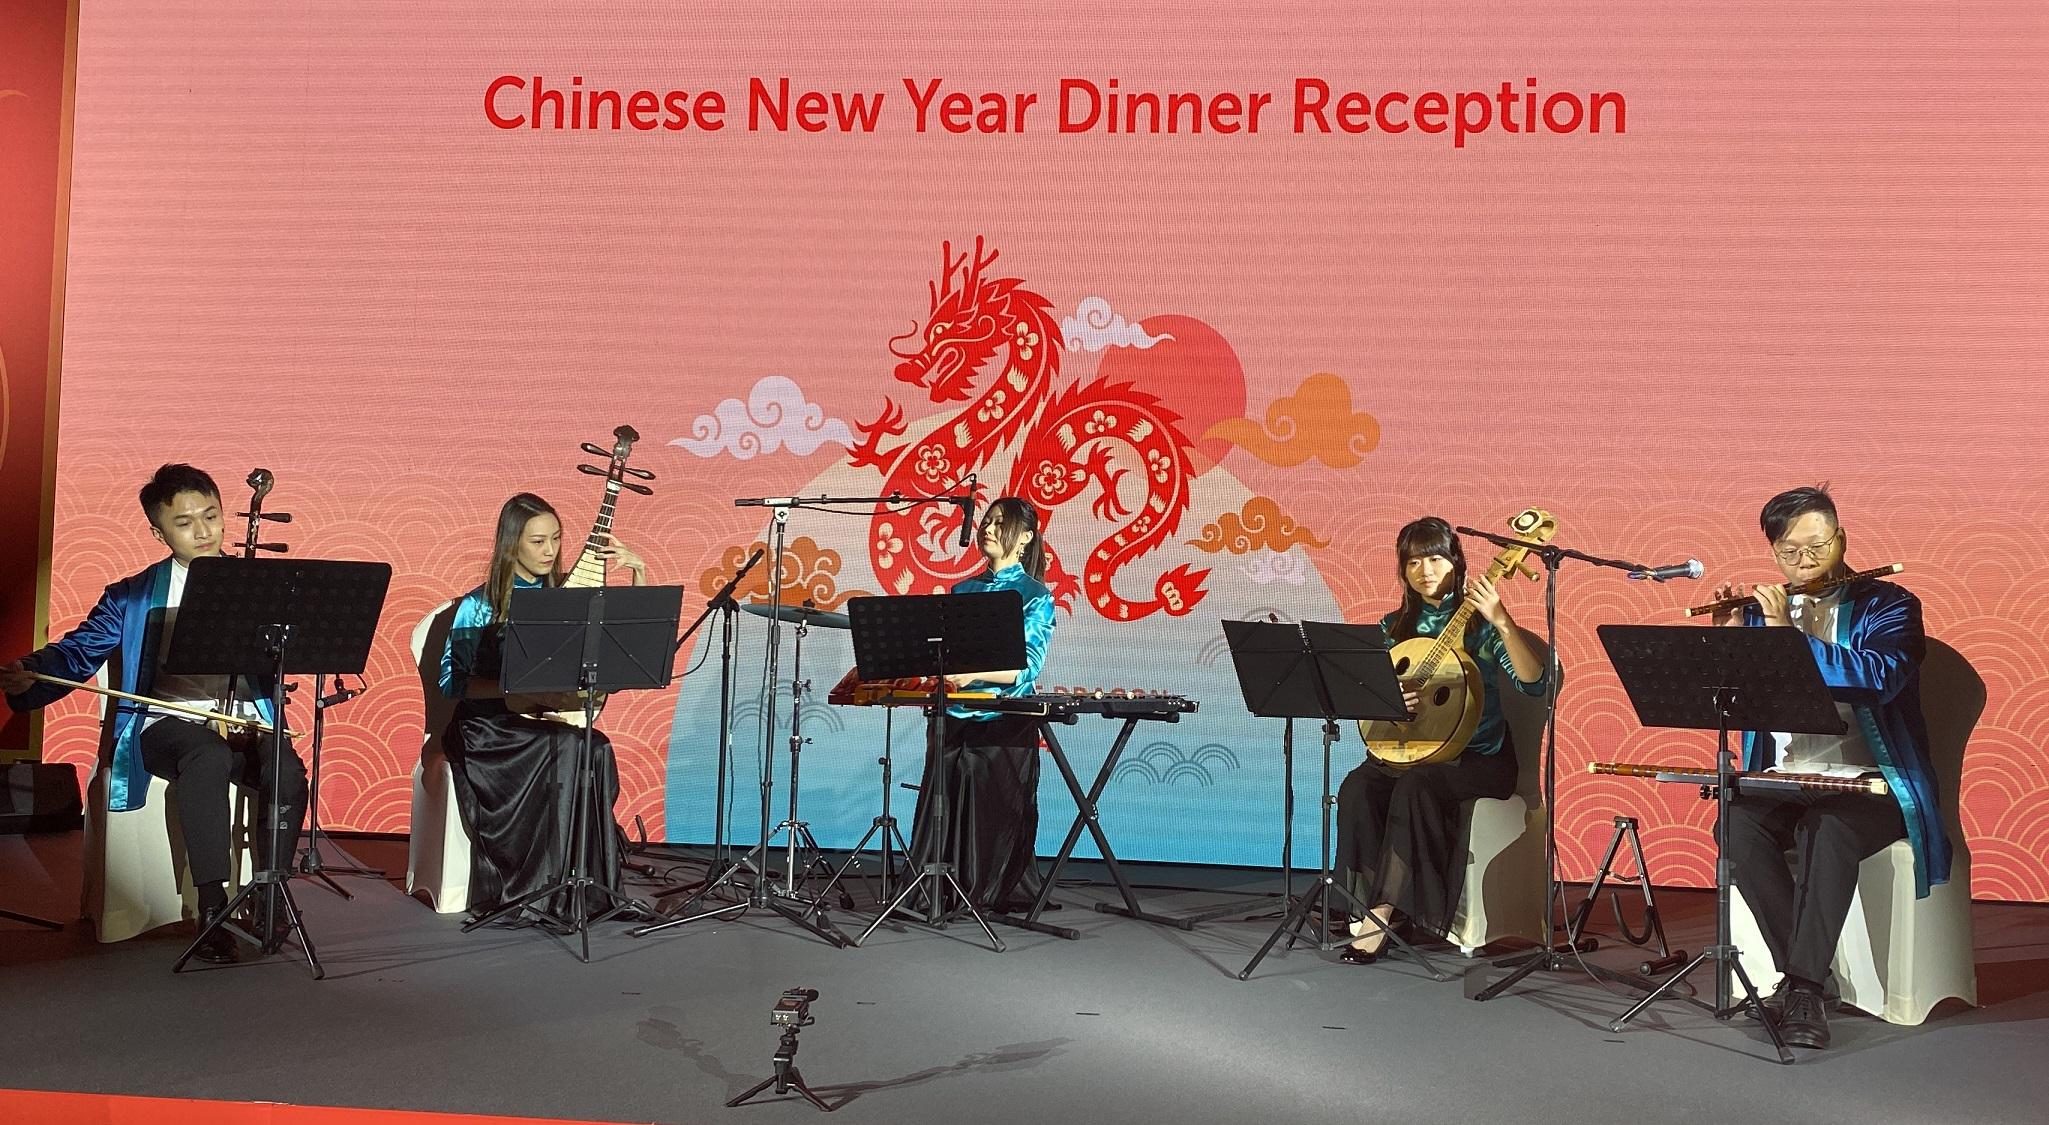 The Hong Kong Economic and Trade Office in Dubai, in collaboration with the Hong Kong Trade Development Council and the Abu Dhabi Chamber of Commerce and Industry, hosted a Chinese New Year dinner reception in Abu Dhabi, the United Arab Emirates, on February 28 (Abu Dhabi time). The event featured a mesmerising performance by musical group Windpipe Chinese Music Ensemble.